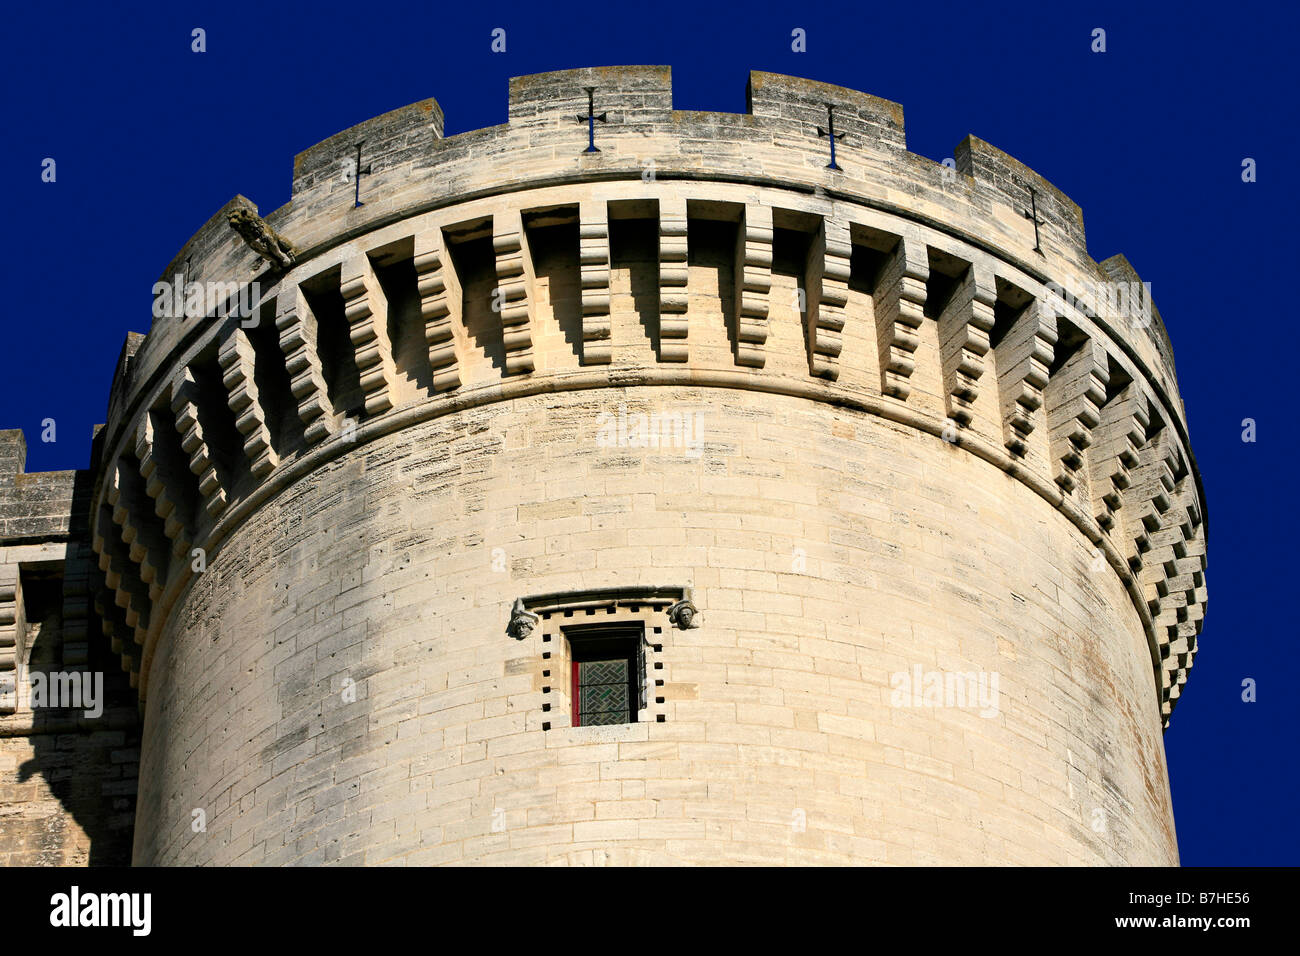 Close-up of the merlons on the battlement of a tower of the 15th century castle of King René (1409-1480) in Tarascon, France Stock Photo